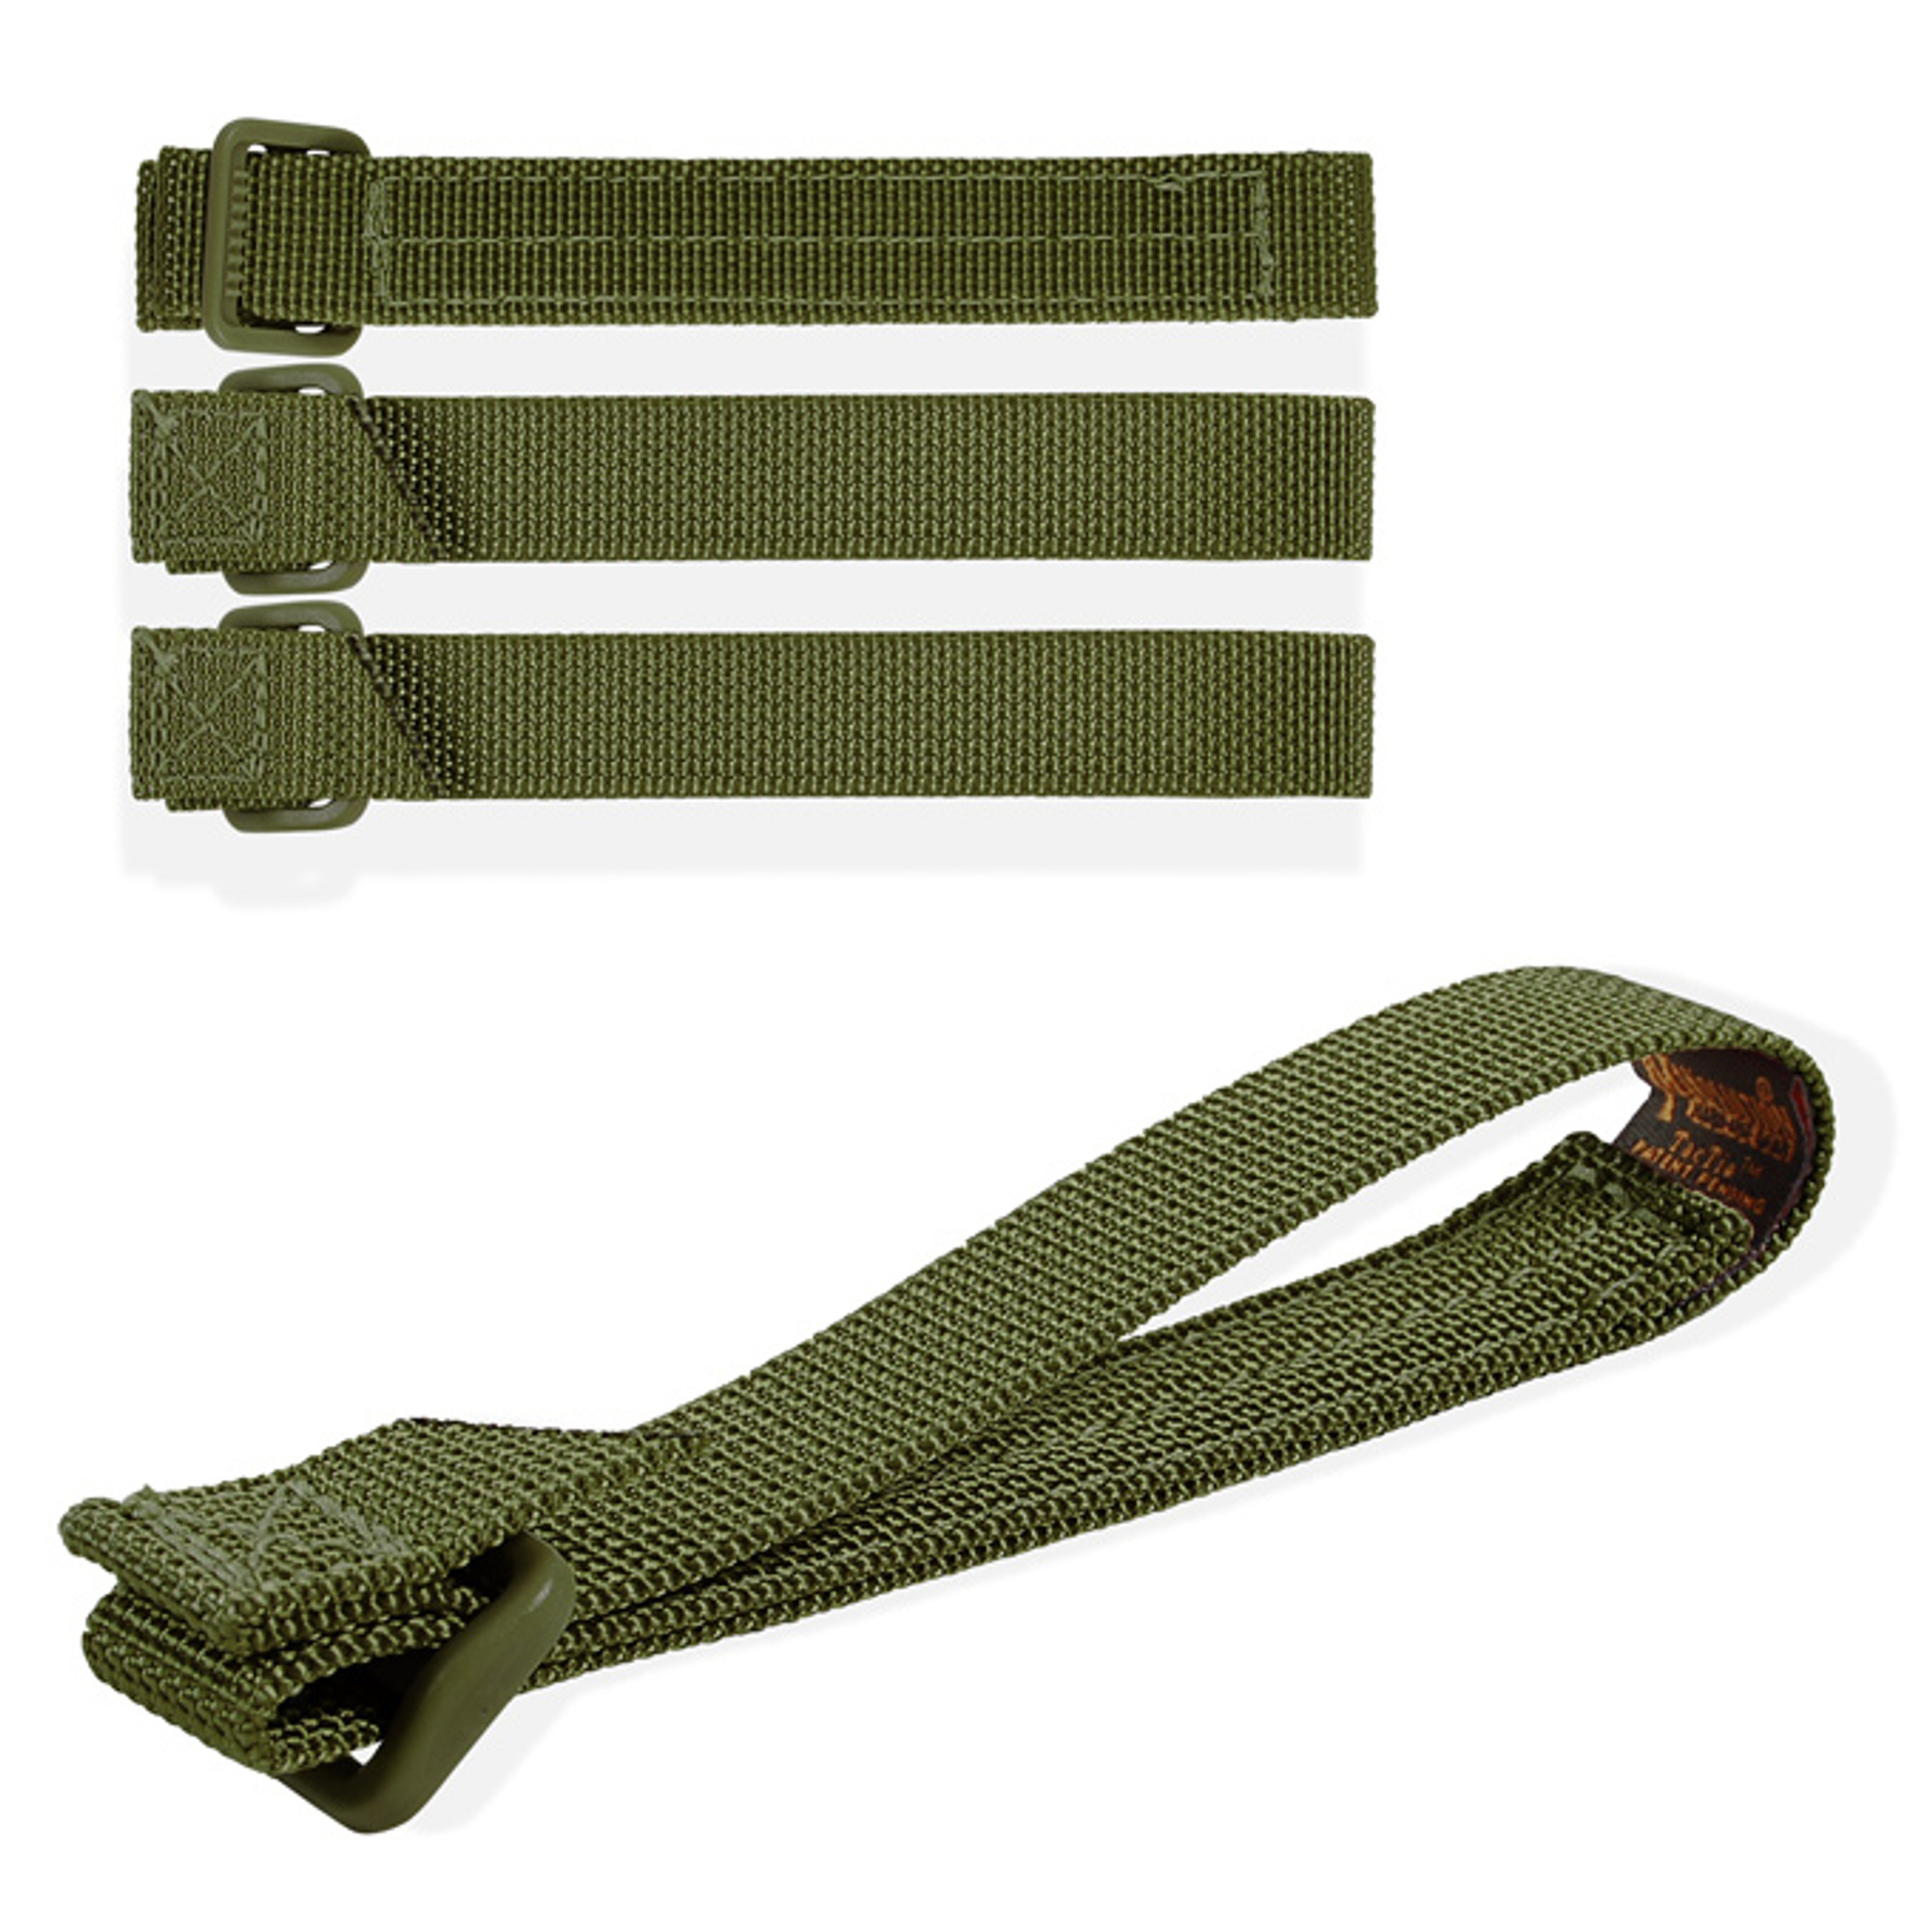 Maxpedition 5" TacTie (4 Pack) - OD Green